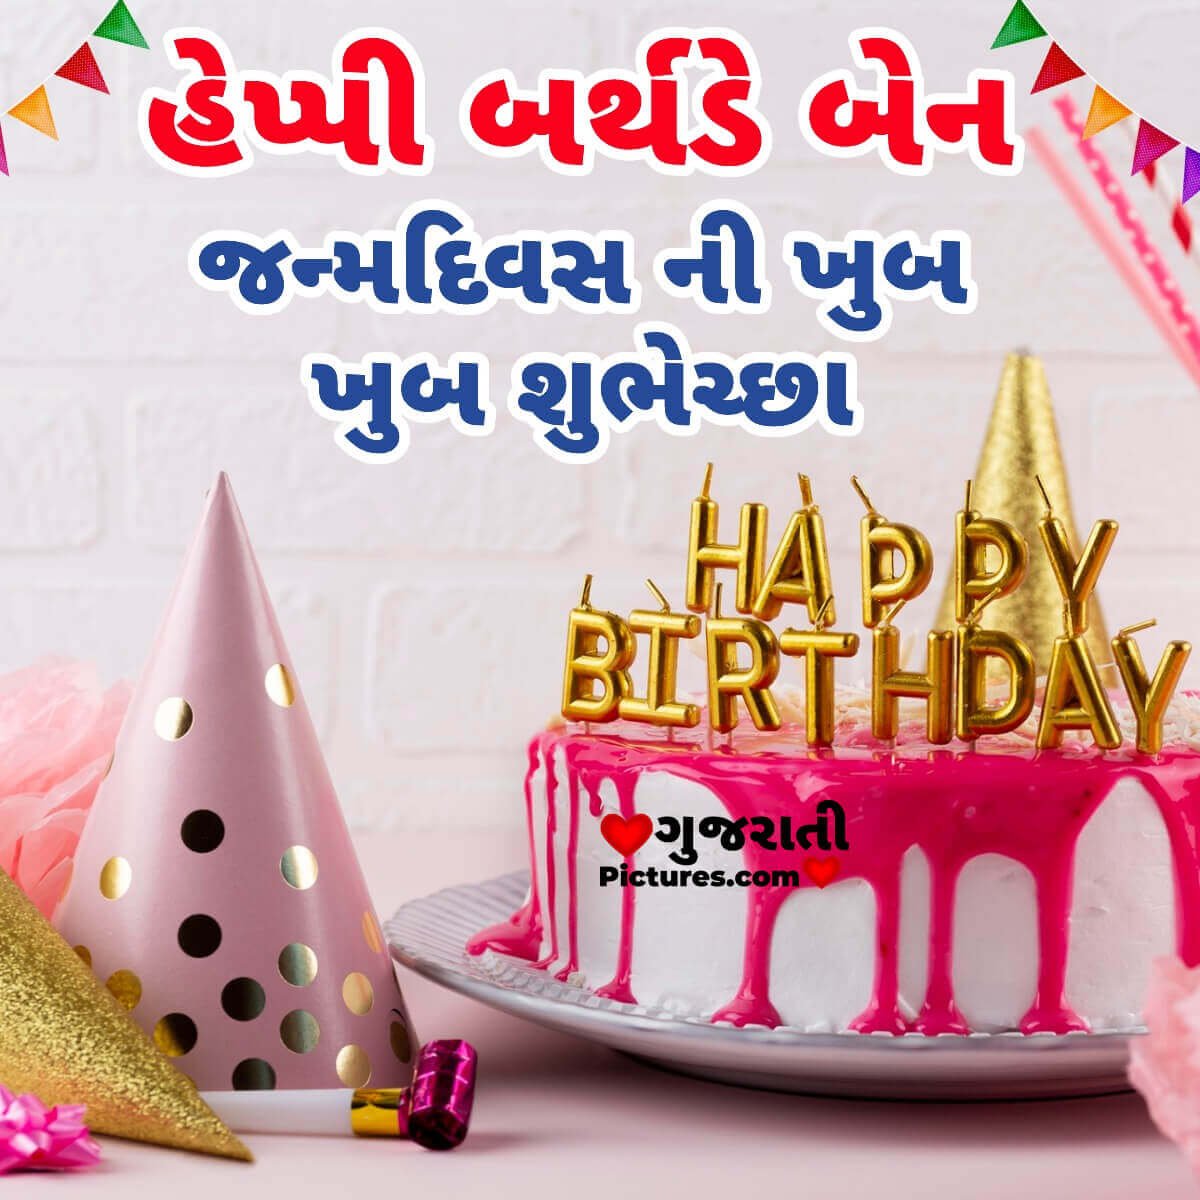 Birthday Wish Image For Sister - Gujarati Pictures – Website Dedicated ...